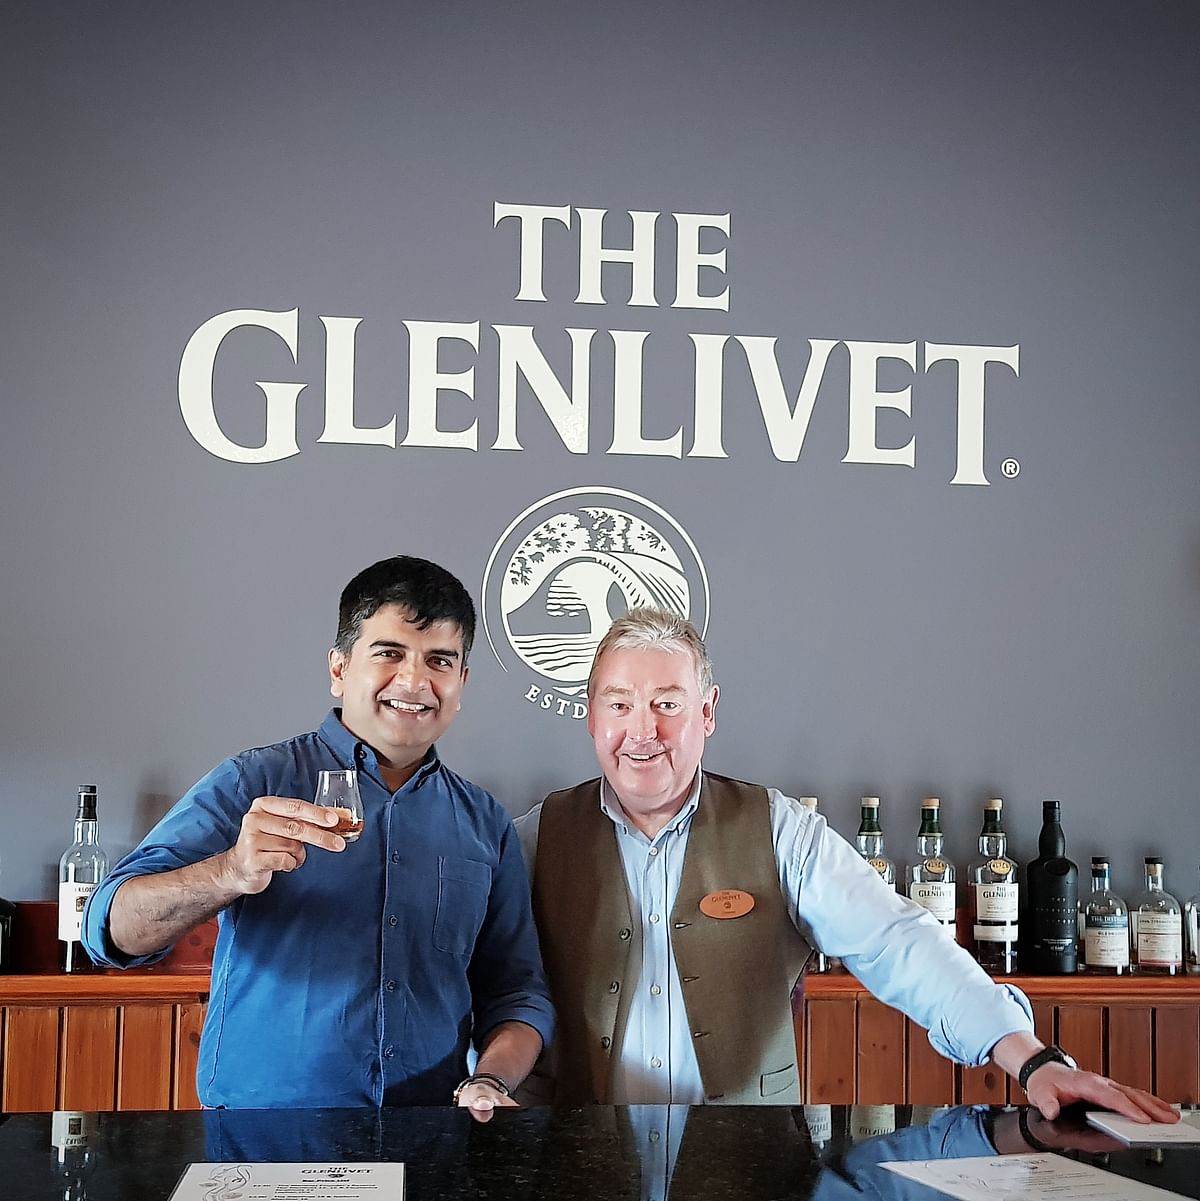 Almost 200 years later, Glenlivet can claim to be the Single Malt that started it all. 